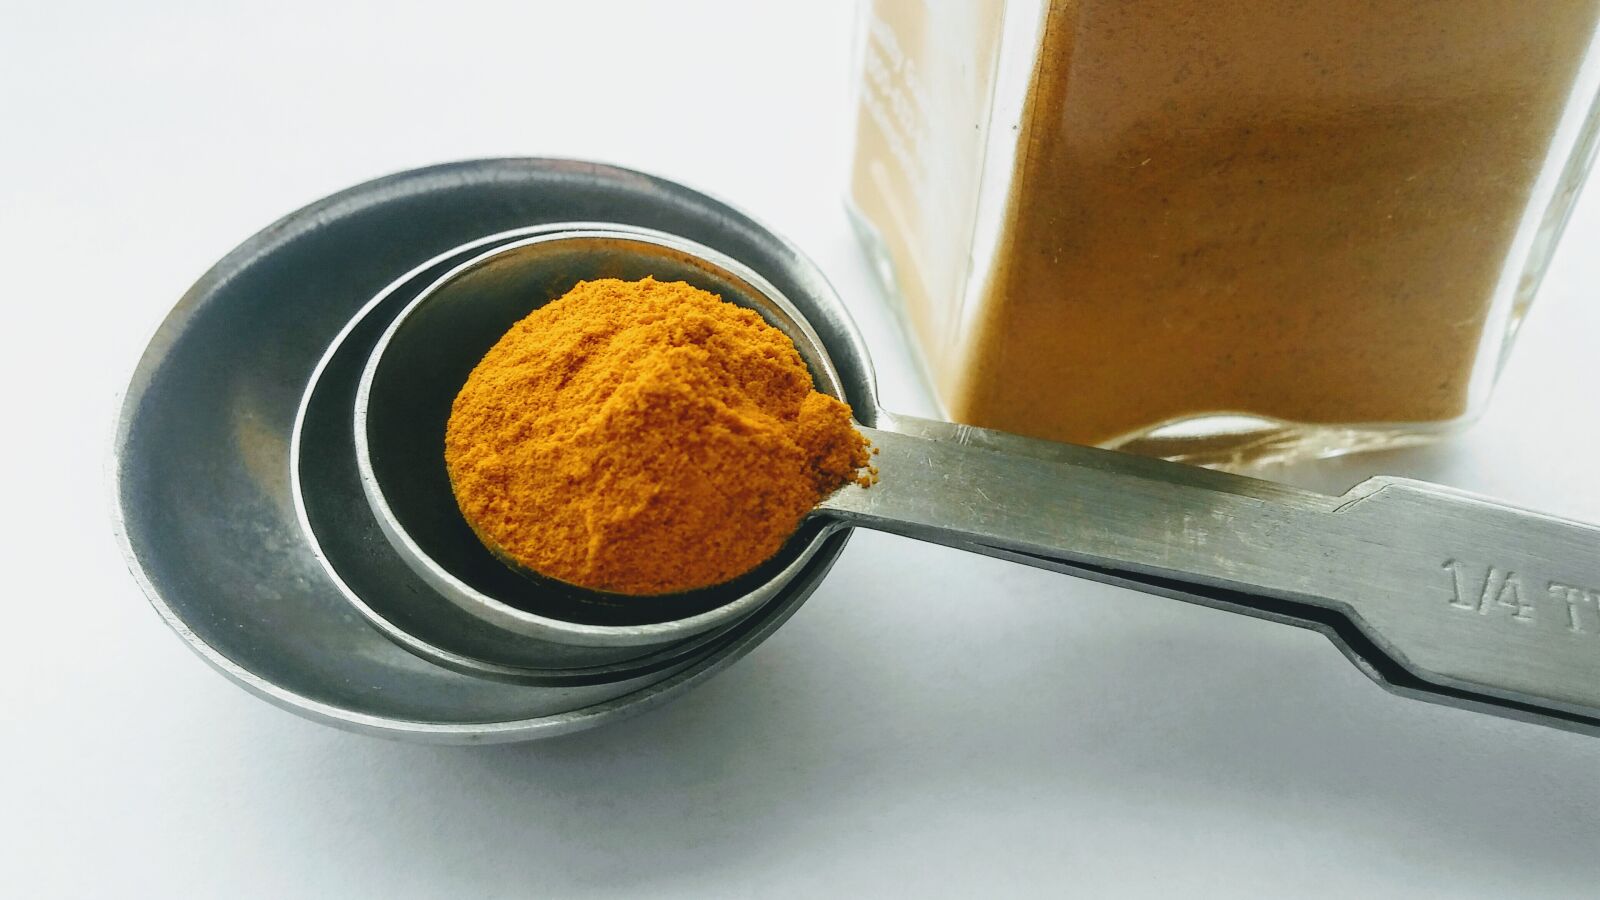 LG G STYLO sample photo. Turmeric, spices, spoon photography